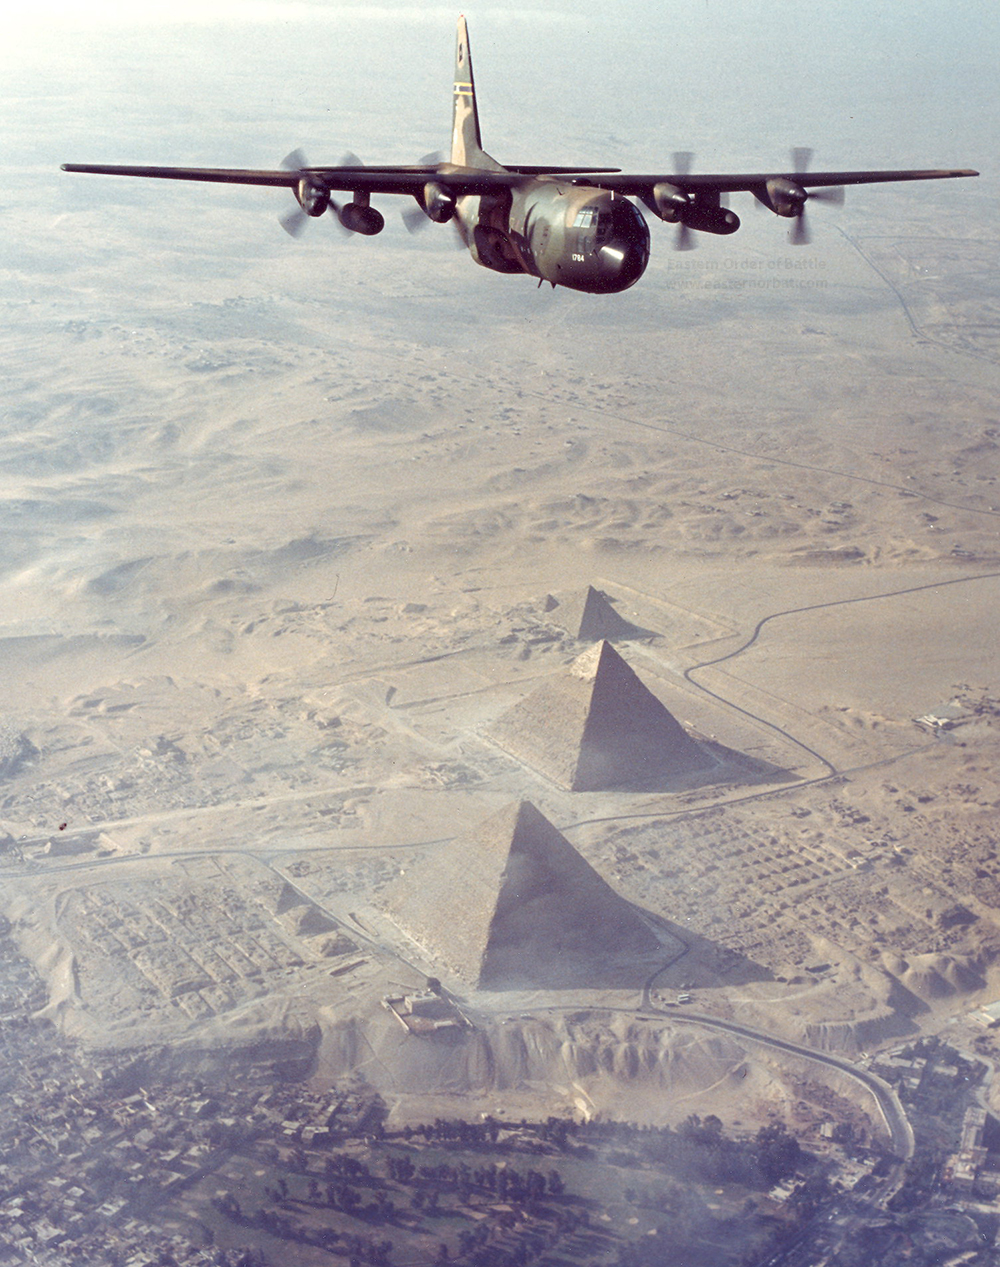 C-130E_of_the_130th_Airlift_Group_out_of_Charleston__West_Virginia_flying_over_the_famed_pyramids_of_Egypt_in_November__1981.JPG